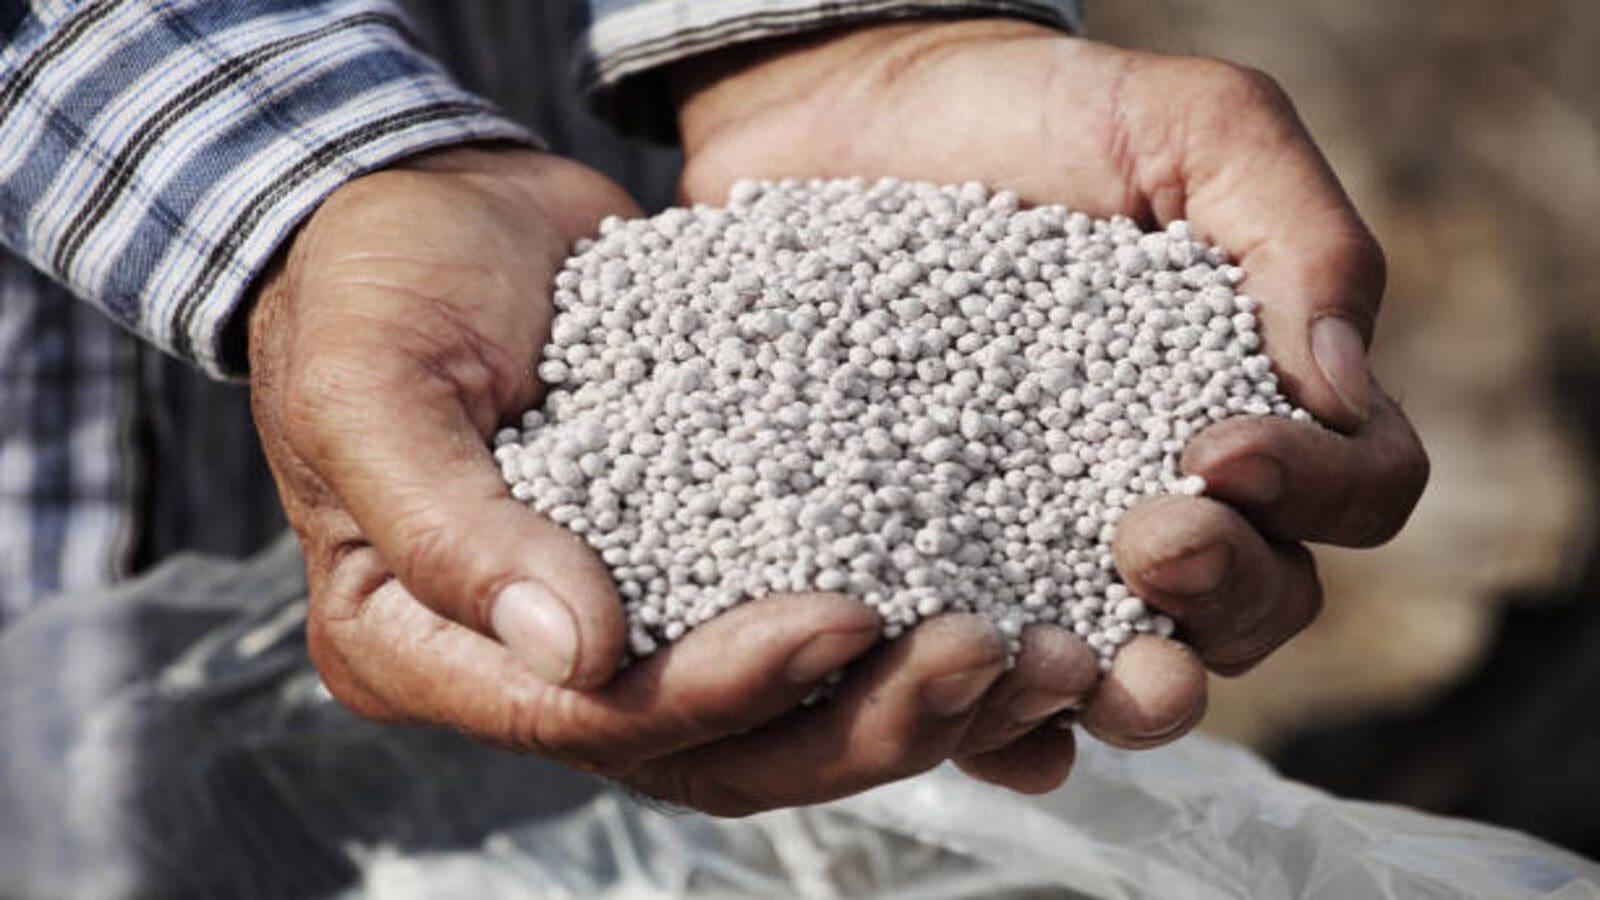 Russia has donated 34,400 tonnes of raw fertilizer for Fertilizer Subsidy Programme in Kenya